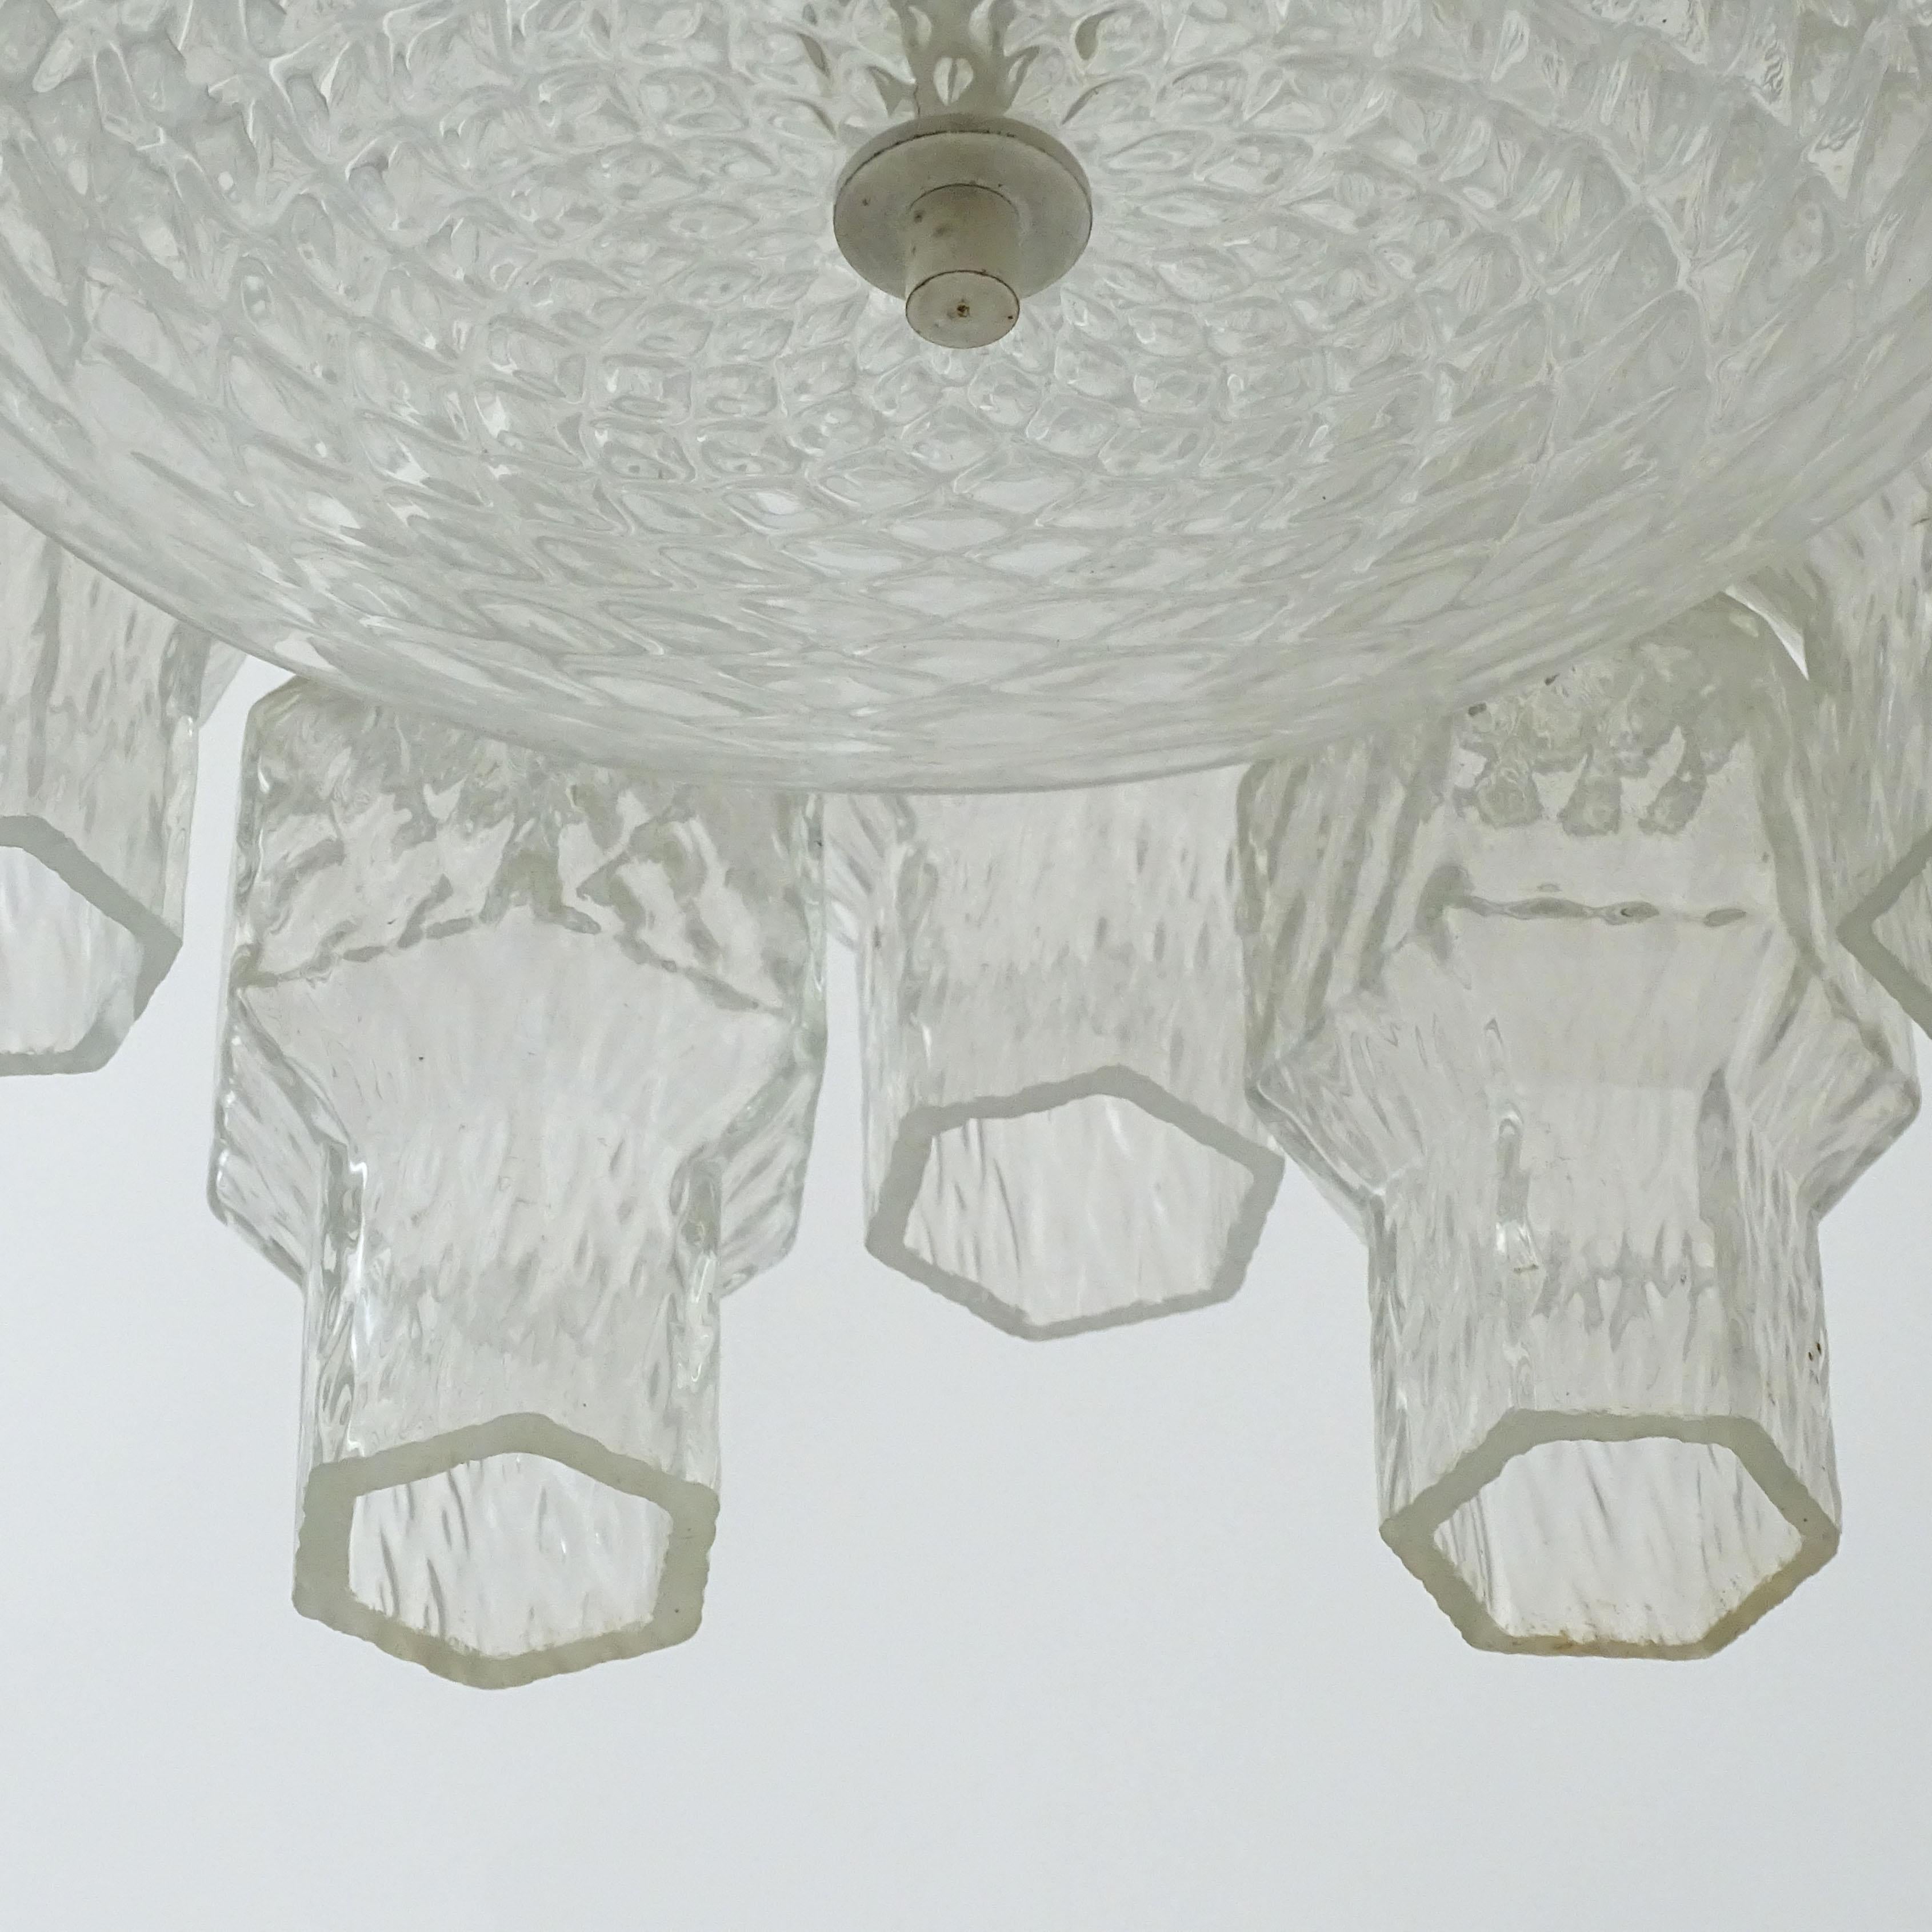 Archimede Seguso Murano Glass Ceiling Light, Italy 1950s For Sale 1